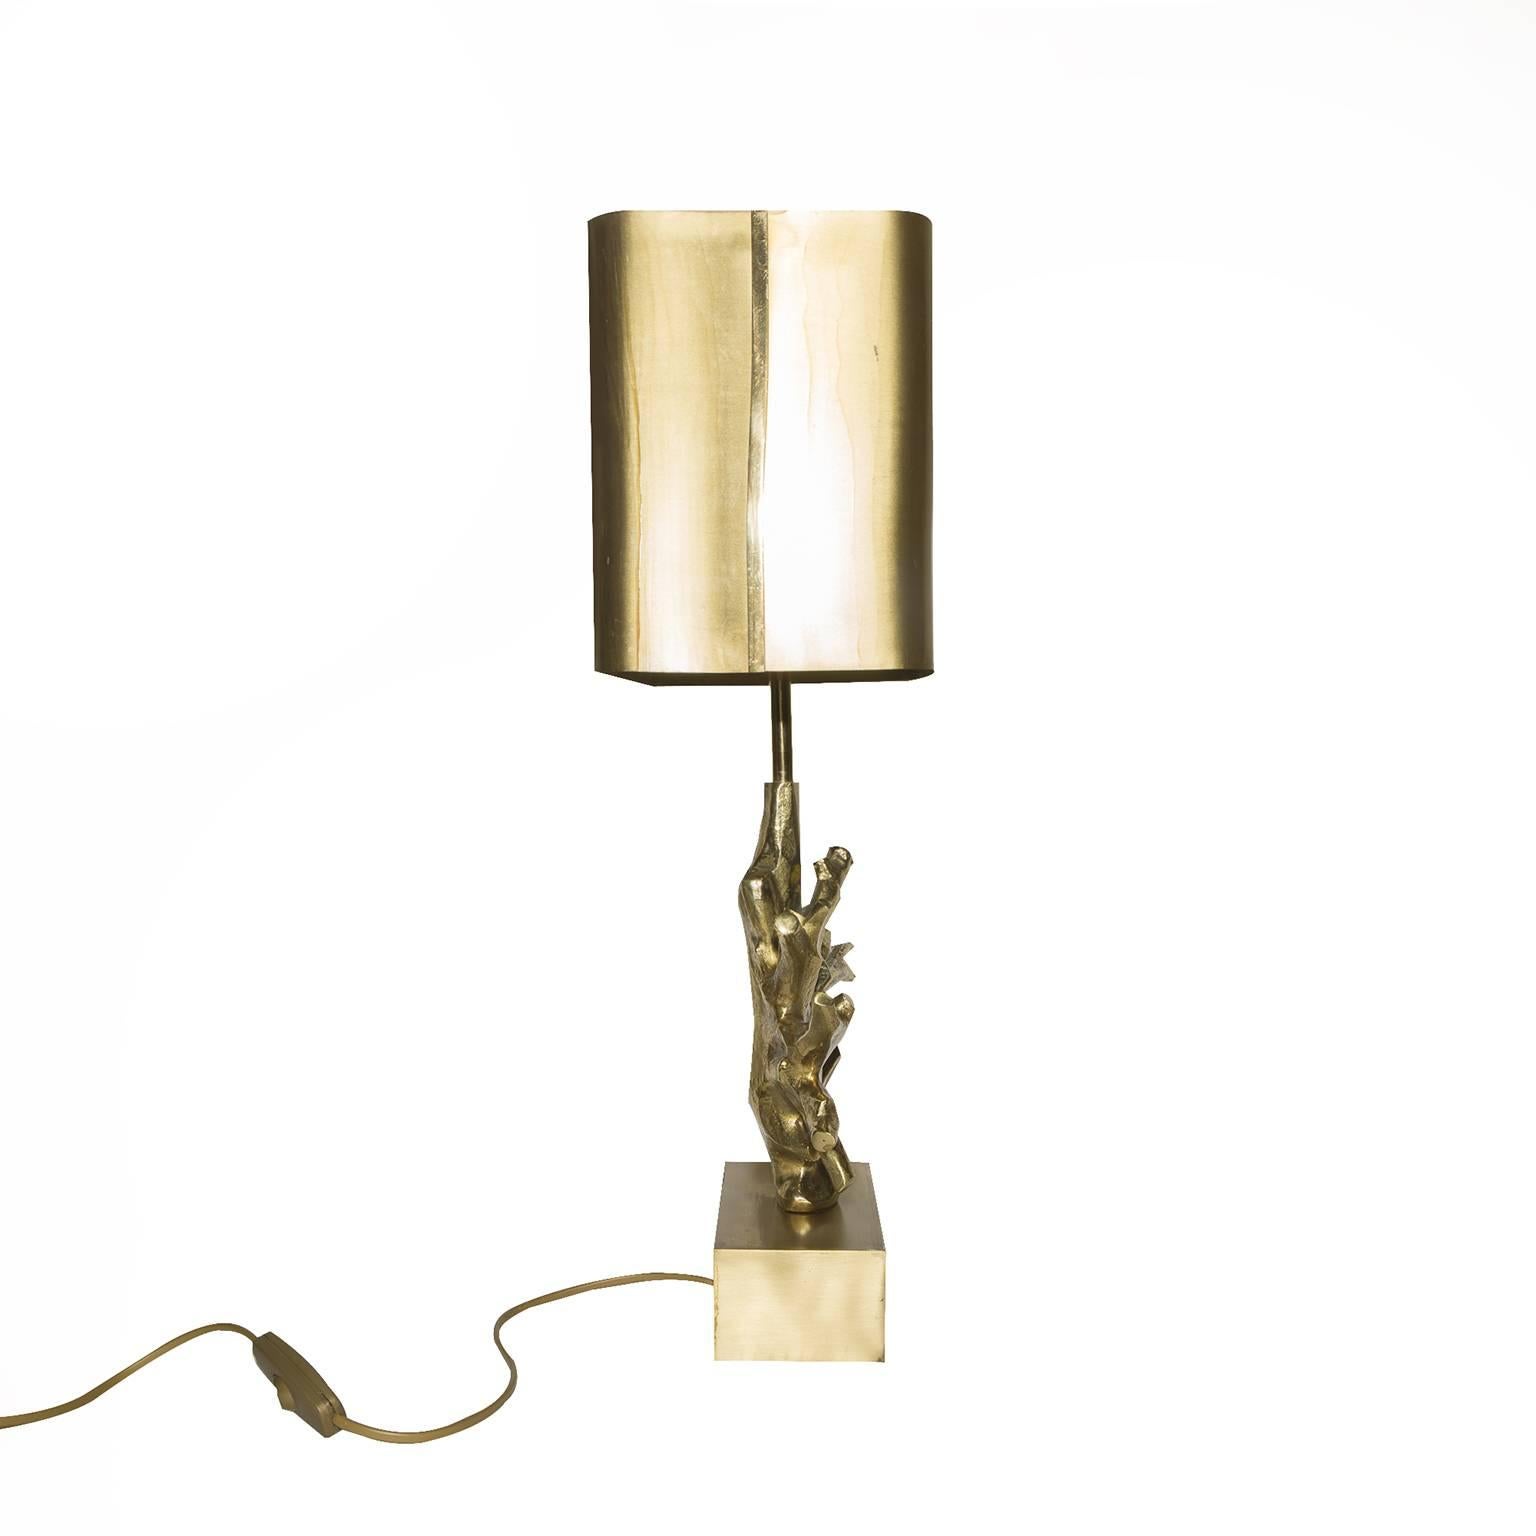 French manufacturer Maison Charles is one of the oldest family-owned French lighting companies that is still in operation. Founded in 1908 the company is known for their early reproductions of antique lighting  and, later, for their fanciful bronze